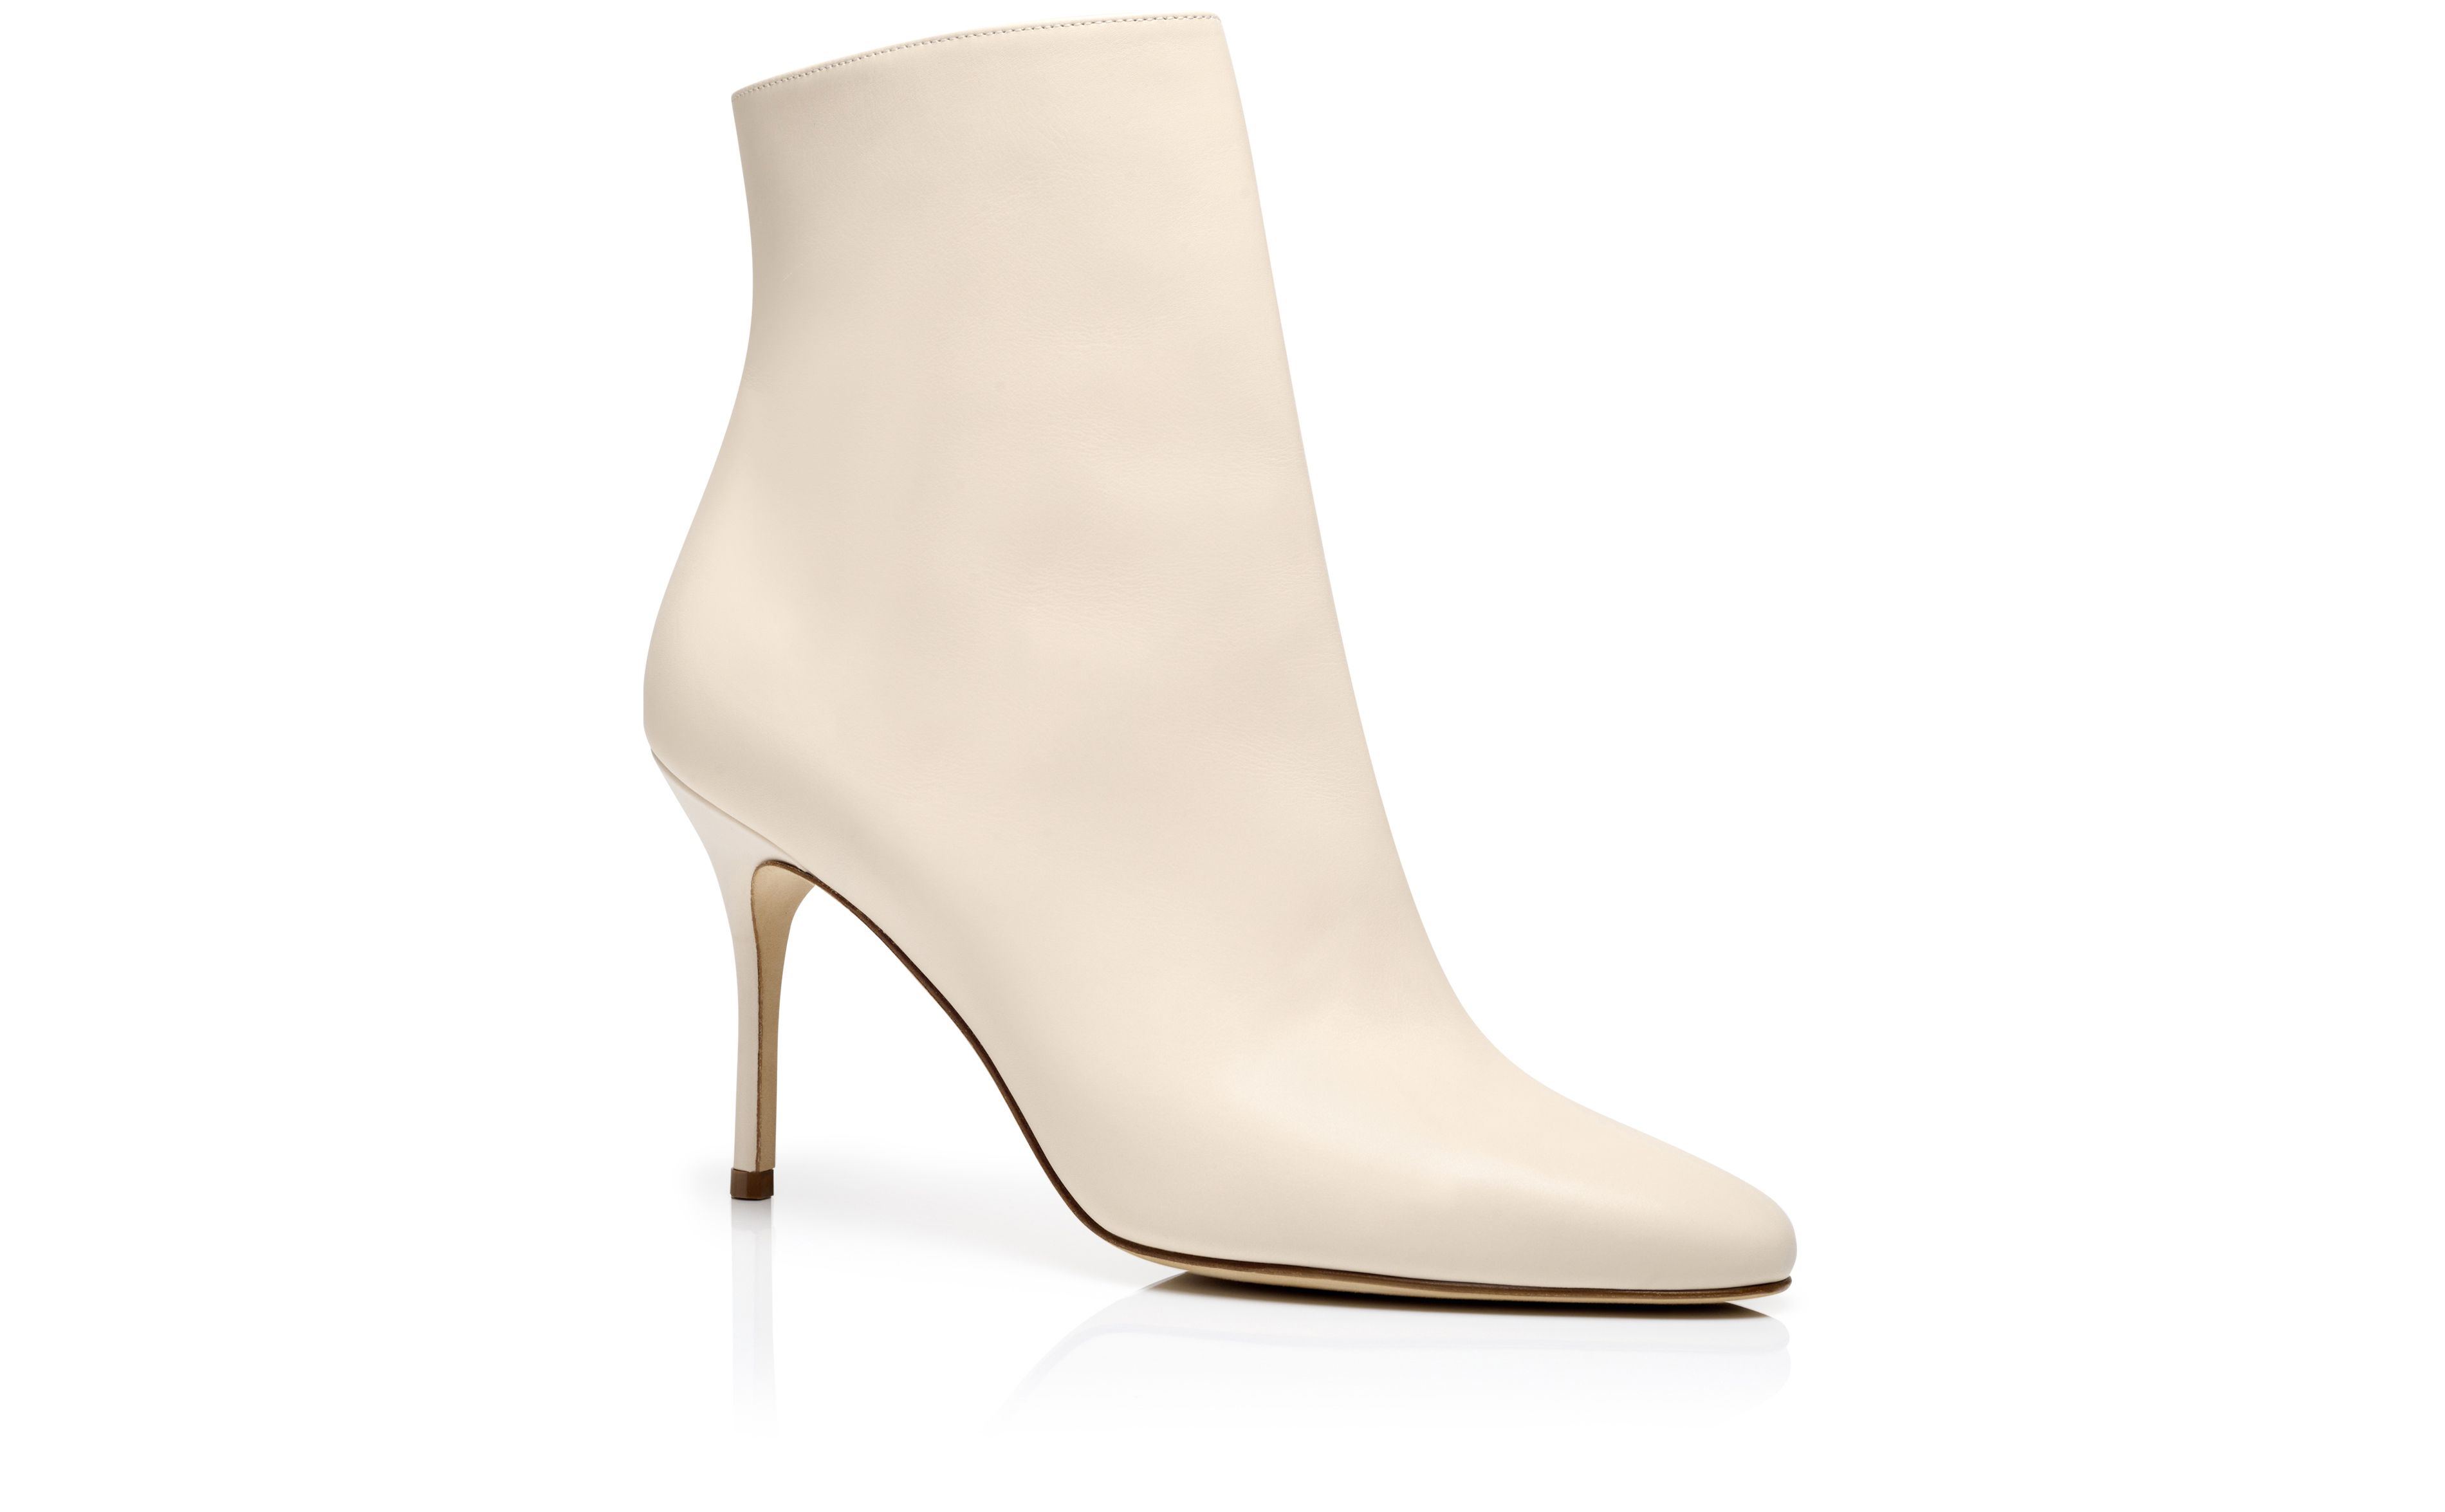 Designer Cream Calf Leather Ankle Boots - Image Upsell